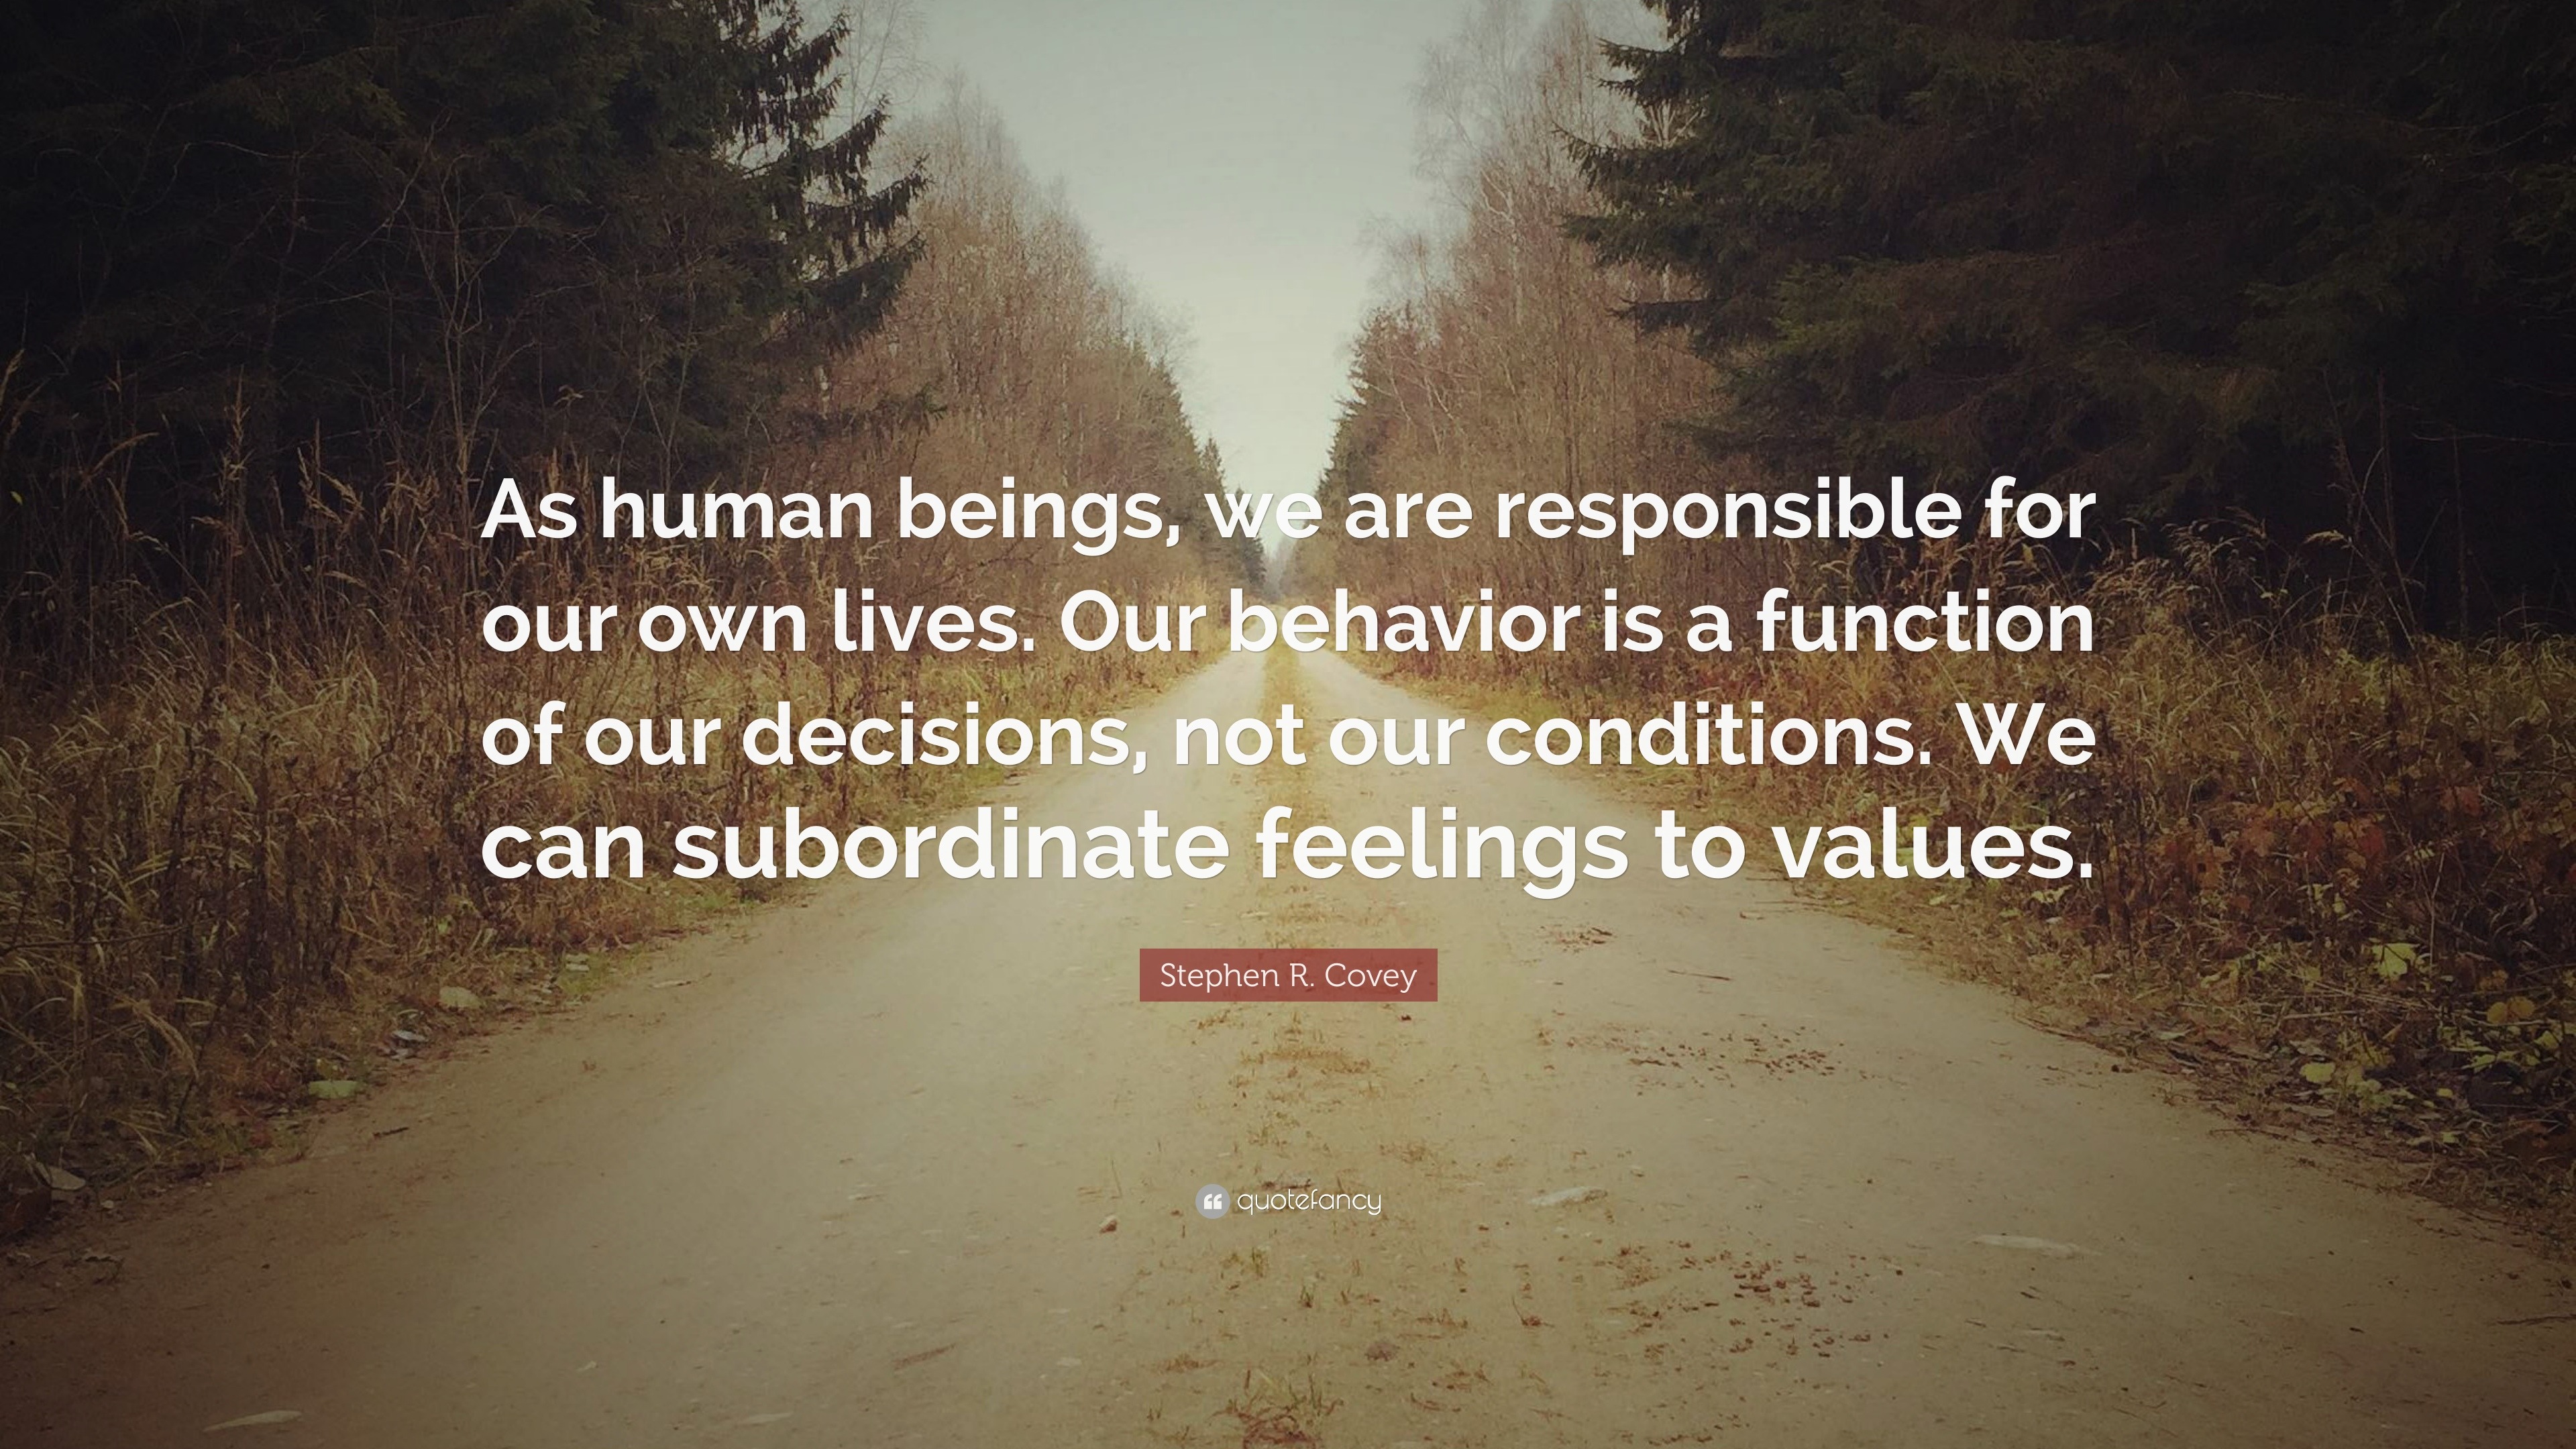 stephen covey we are not human beings